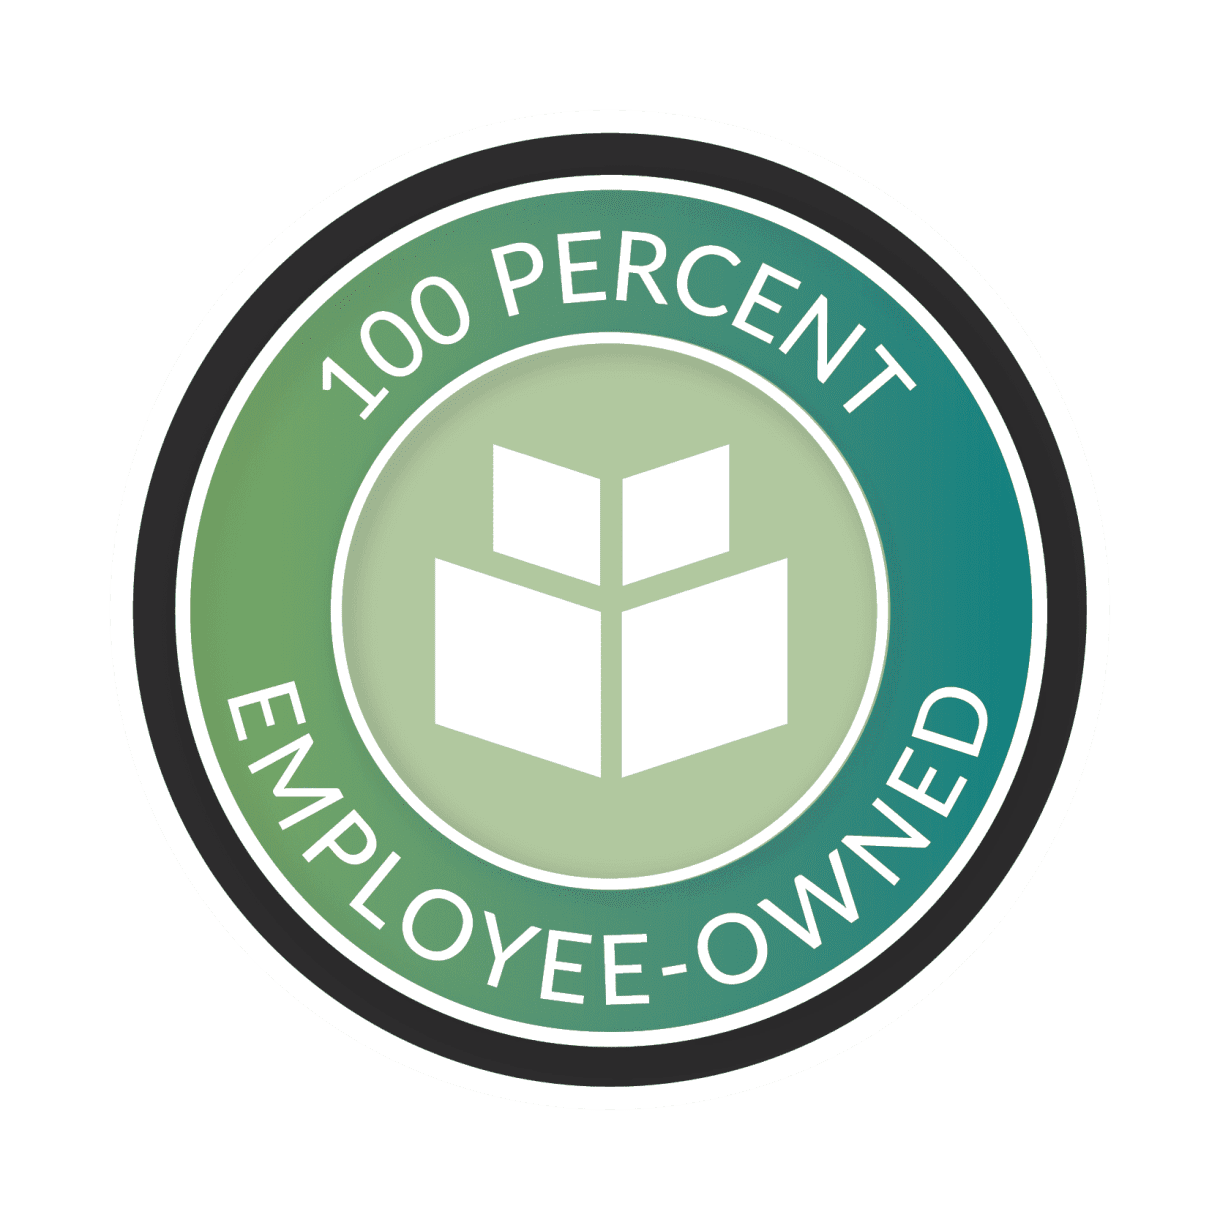 WithersRavenel 100% employee-owned logo to mark ESOP success